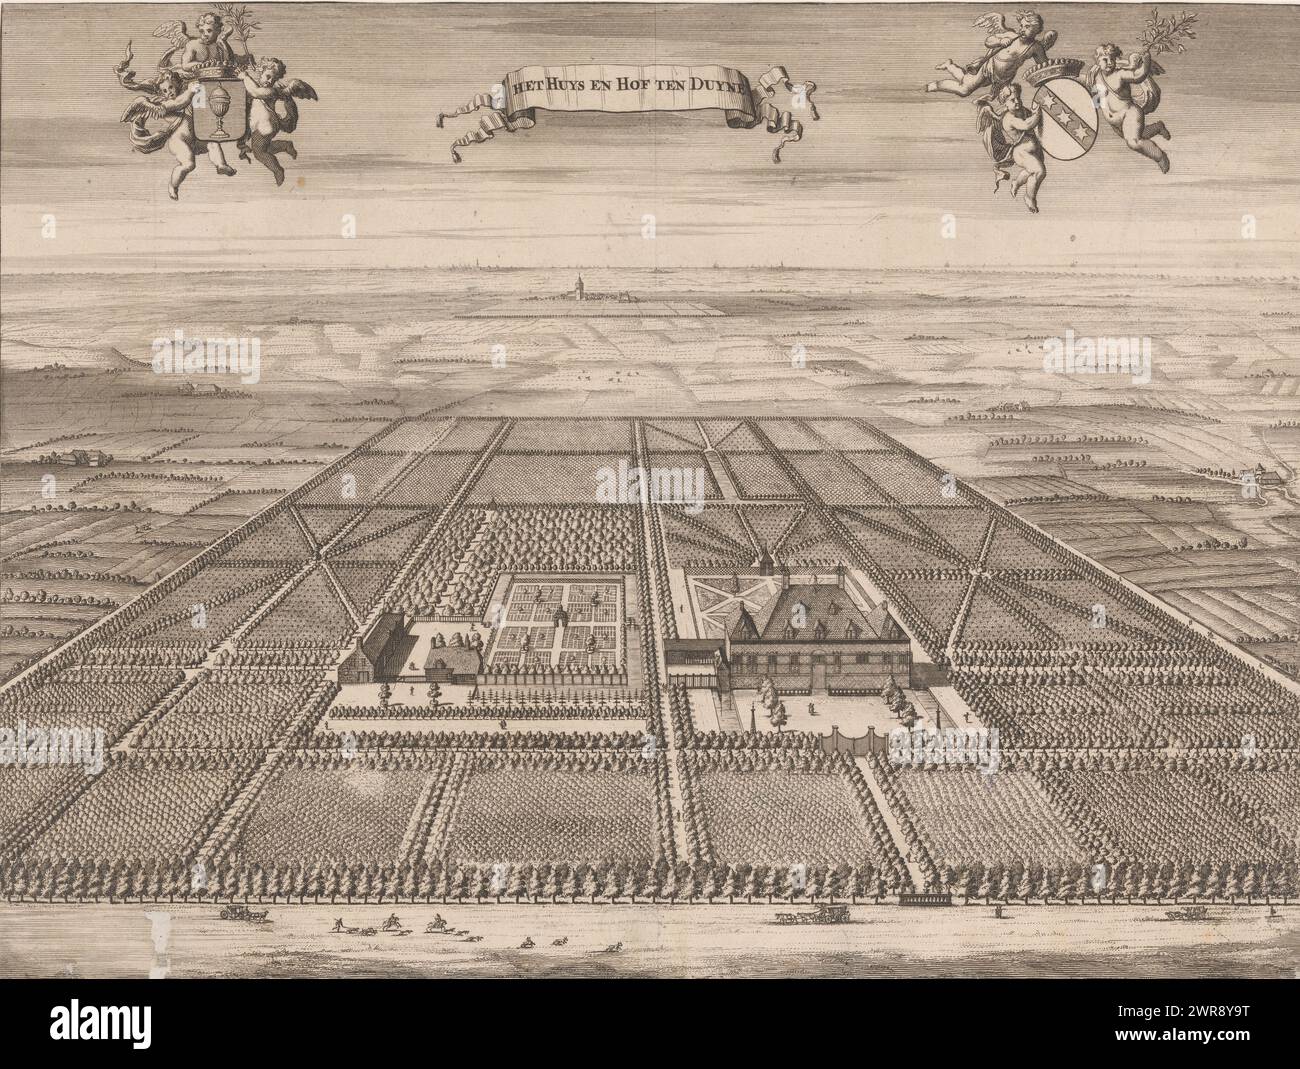 View of the Huis ten Duyne country estate, Het Huys and Hof ten Duyne (title on object), View of the Huis ten Duyne country estate near Oostkapelle, from a bird's-eye perspective. To the right of the center is the country house, surrounded by the associated gardens and orchards. Top left three putti with the coat of arms of owner Johan Godin, top right three putti with the coat of arms of his wife Maria Boddaert., print maker: anonymous, publisher: Johannes Meertens, (possibly), publisher: Abraham van Someren, (possibly), publisher: Middelburg, publisher: Amsterdam, 1696, paper Stock Photo